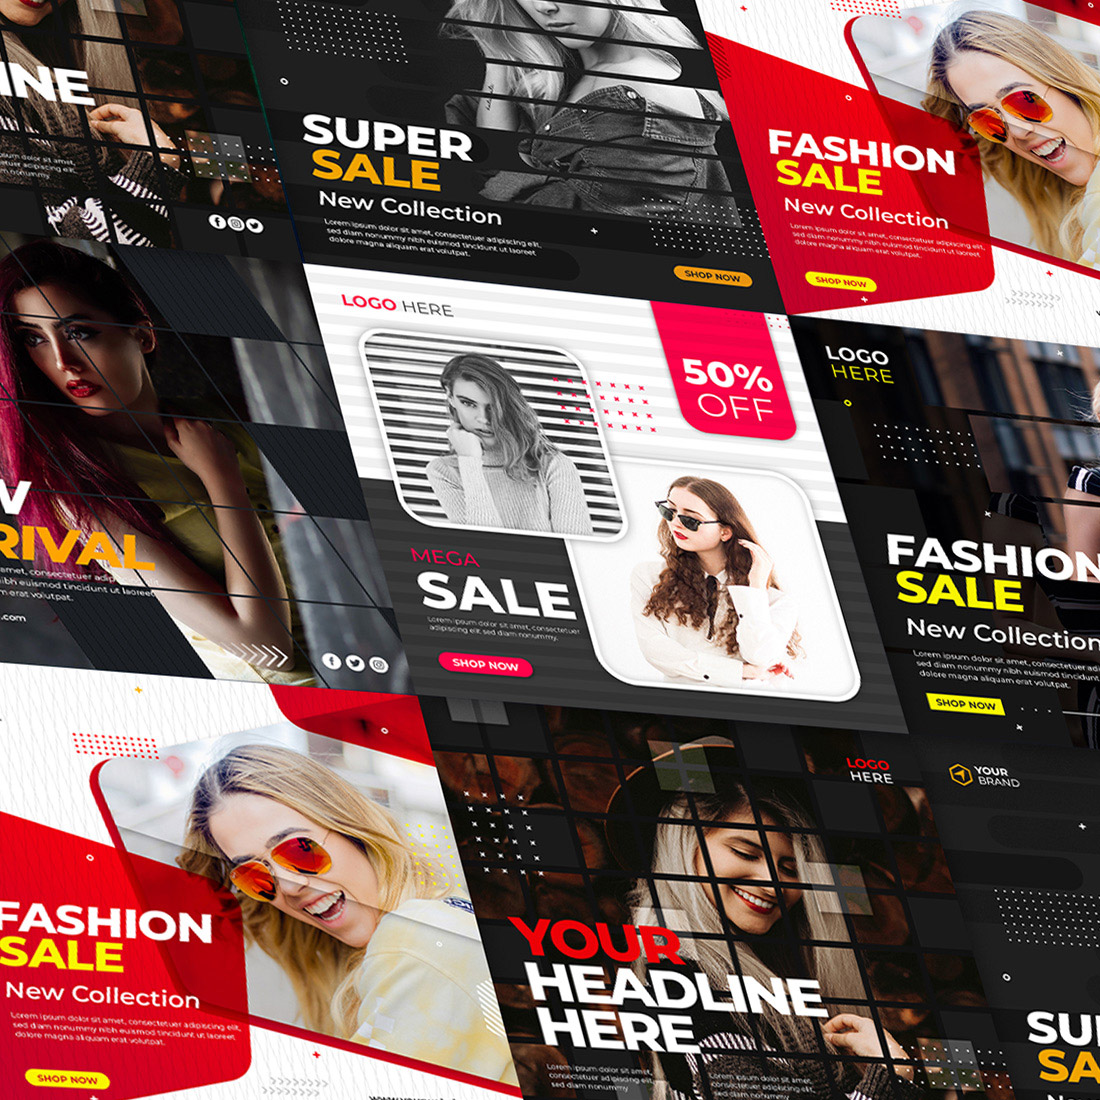 Fashion Sale Banner or Square Flyer for Social Media Post 6 Set Template cover image.